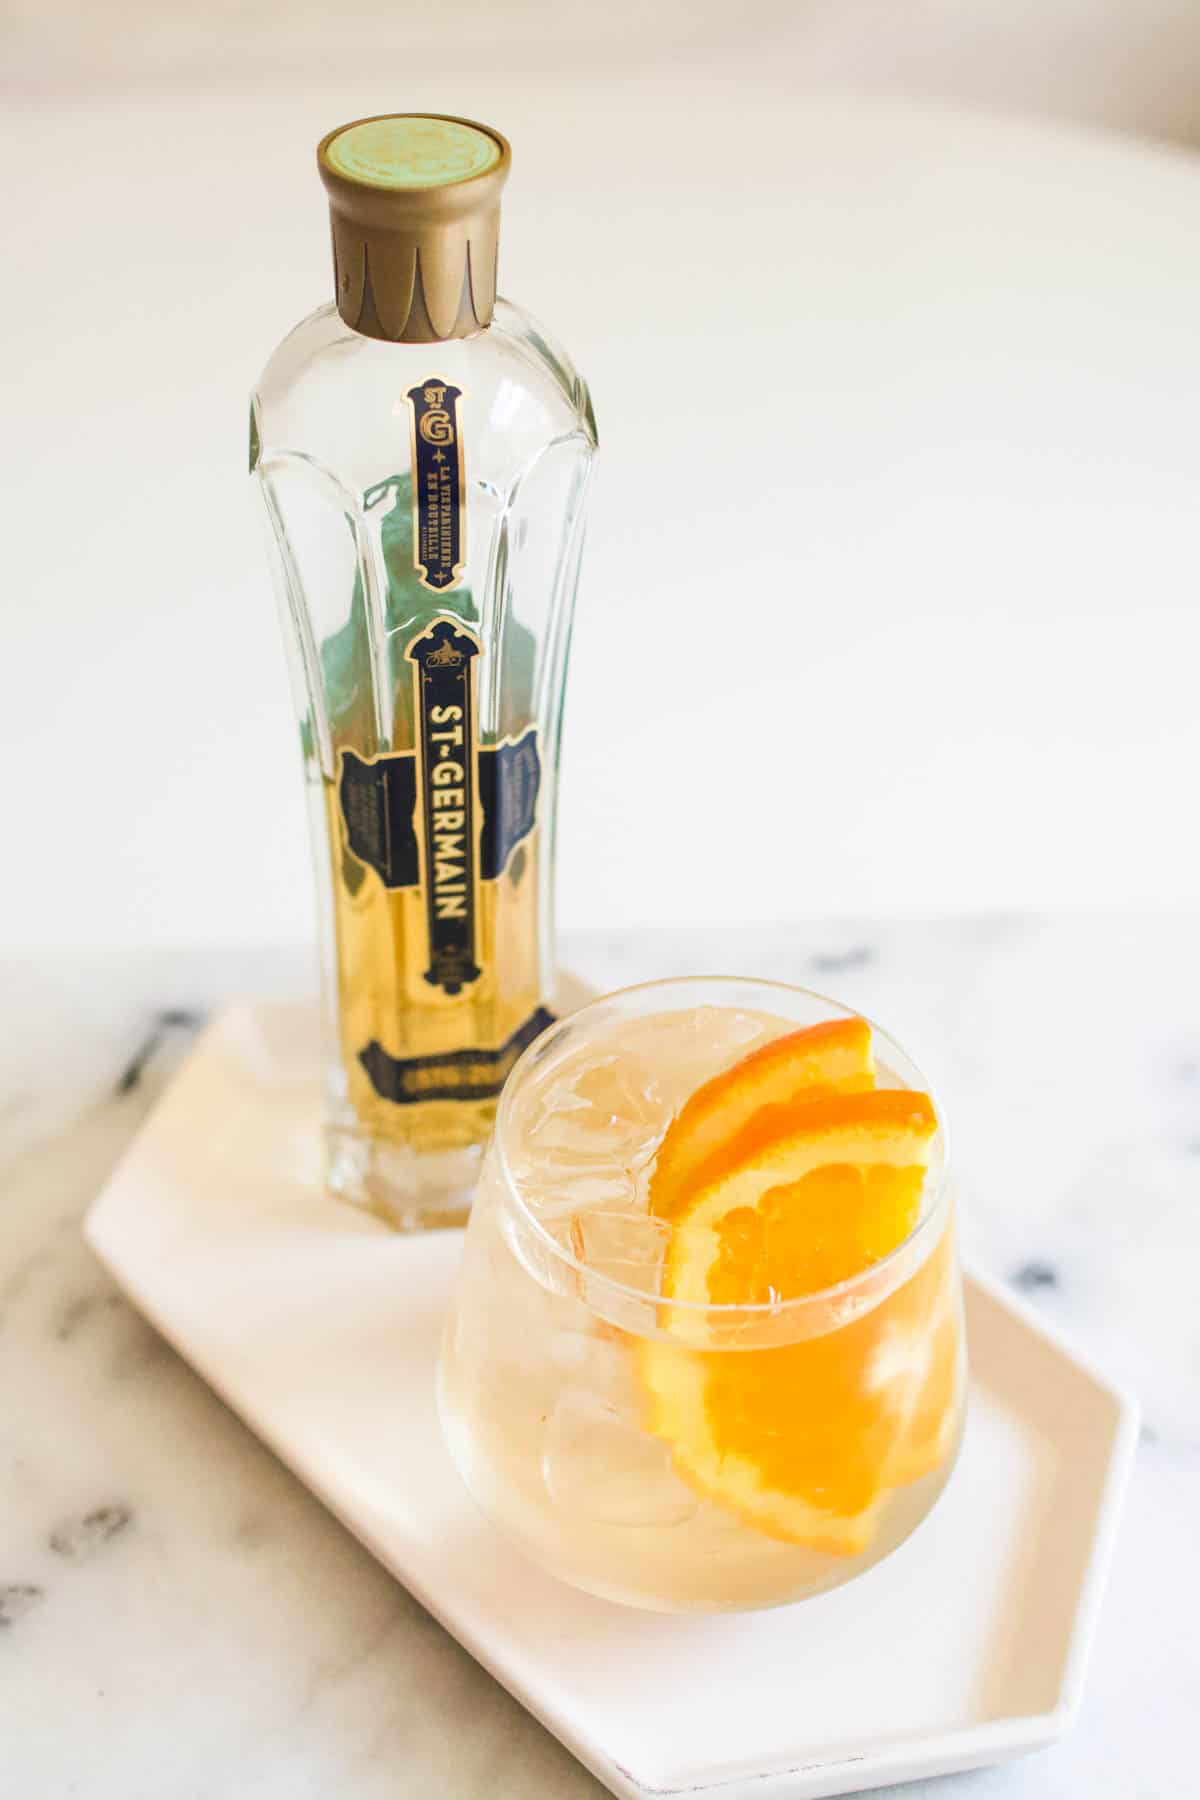 A glass of White Wine St. Germain spritzer garnished with orange slices in front of a bottle of St. Germain liqueur.